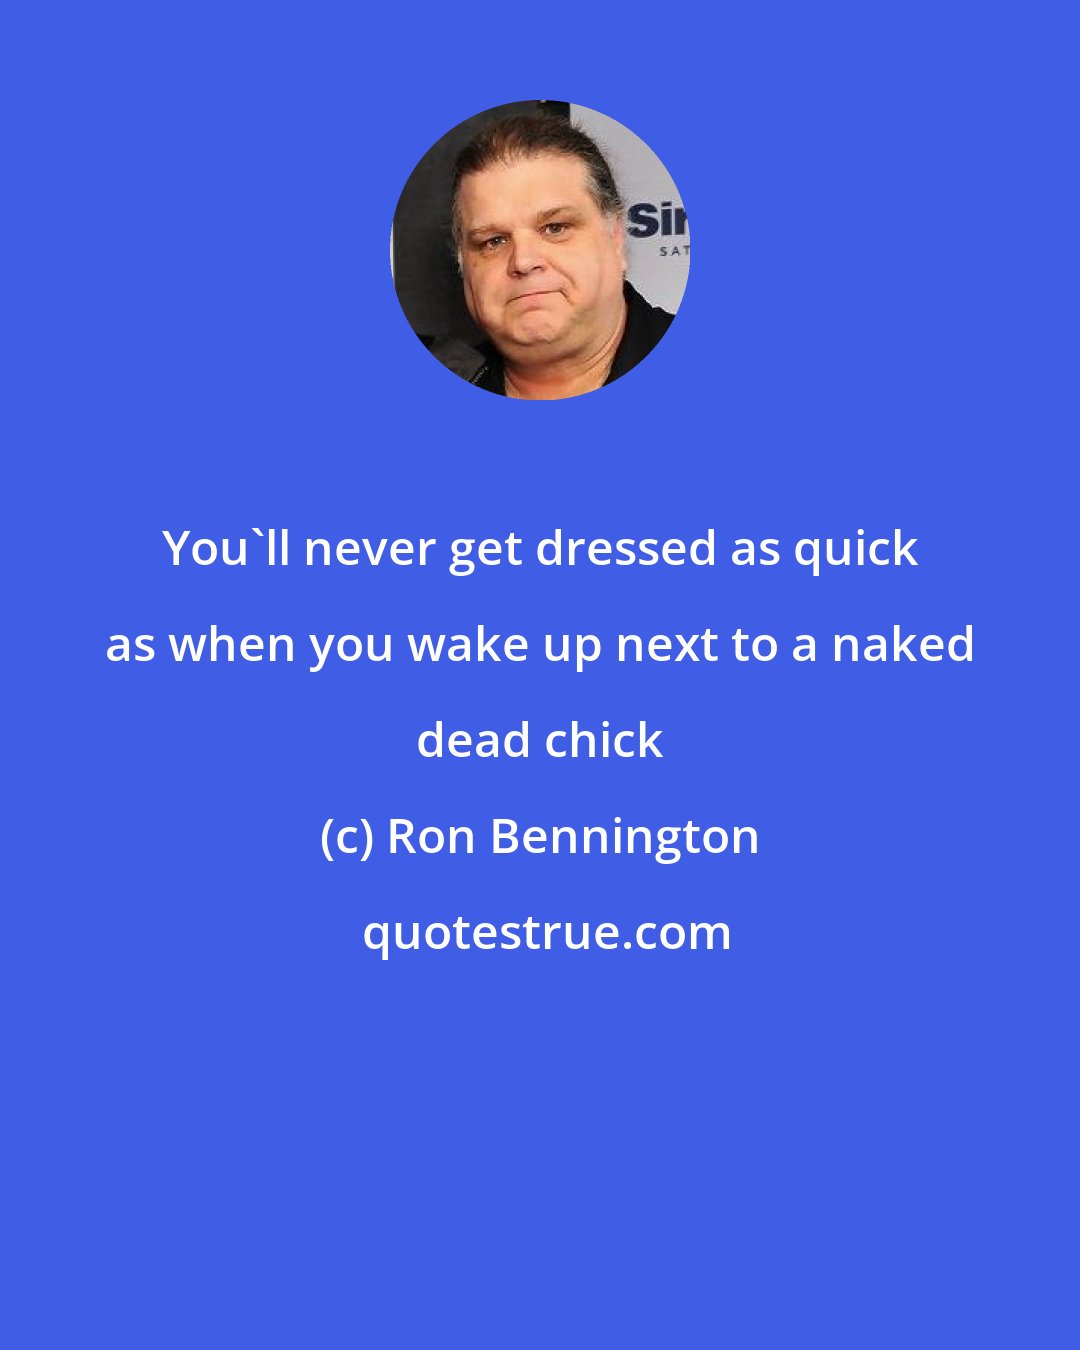 Ron Bennington: You'll never get dressed as quick as when you wake up next to a naked dead chick